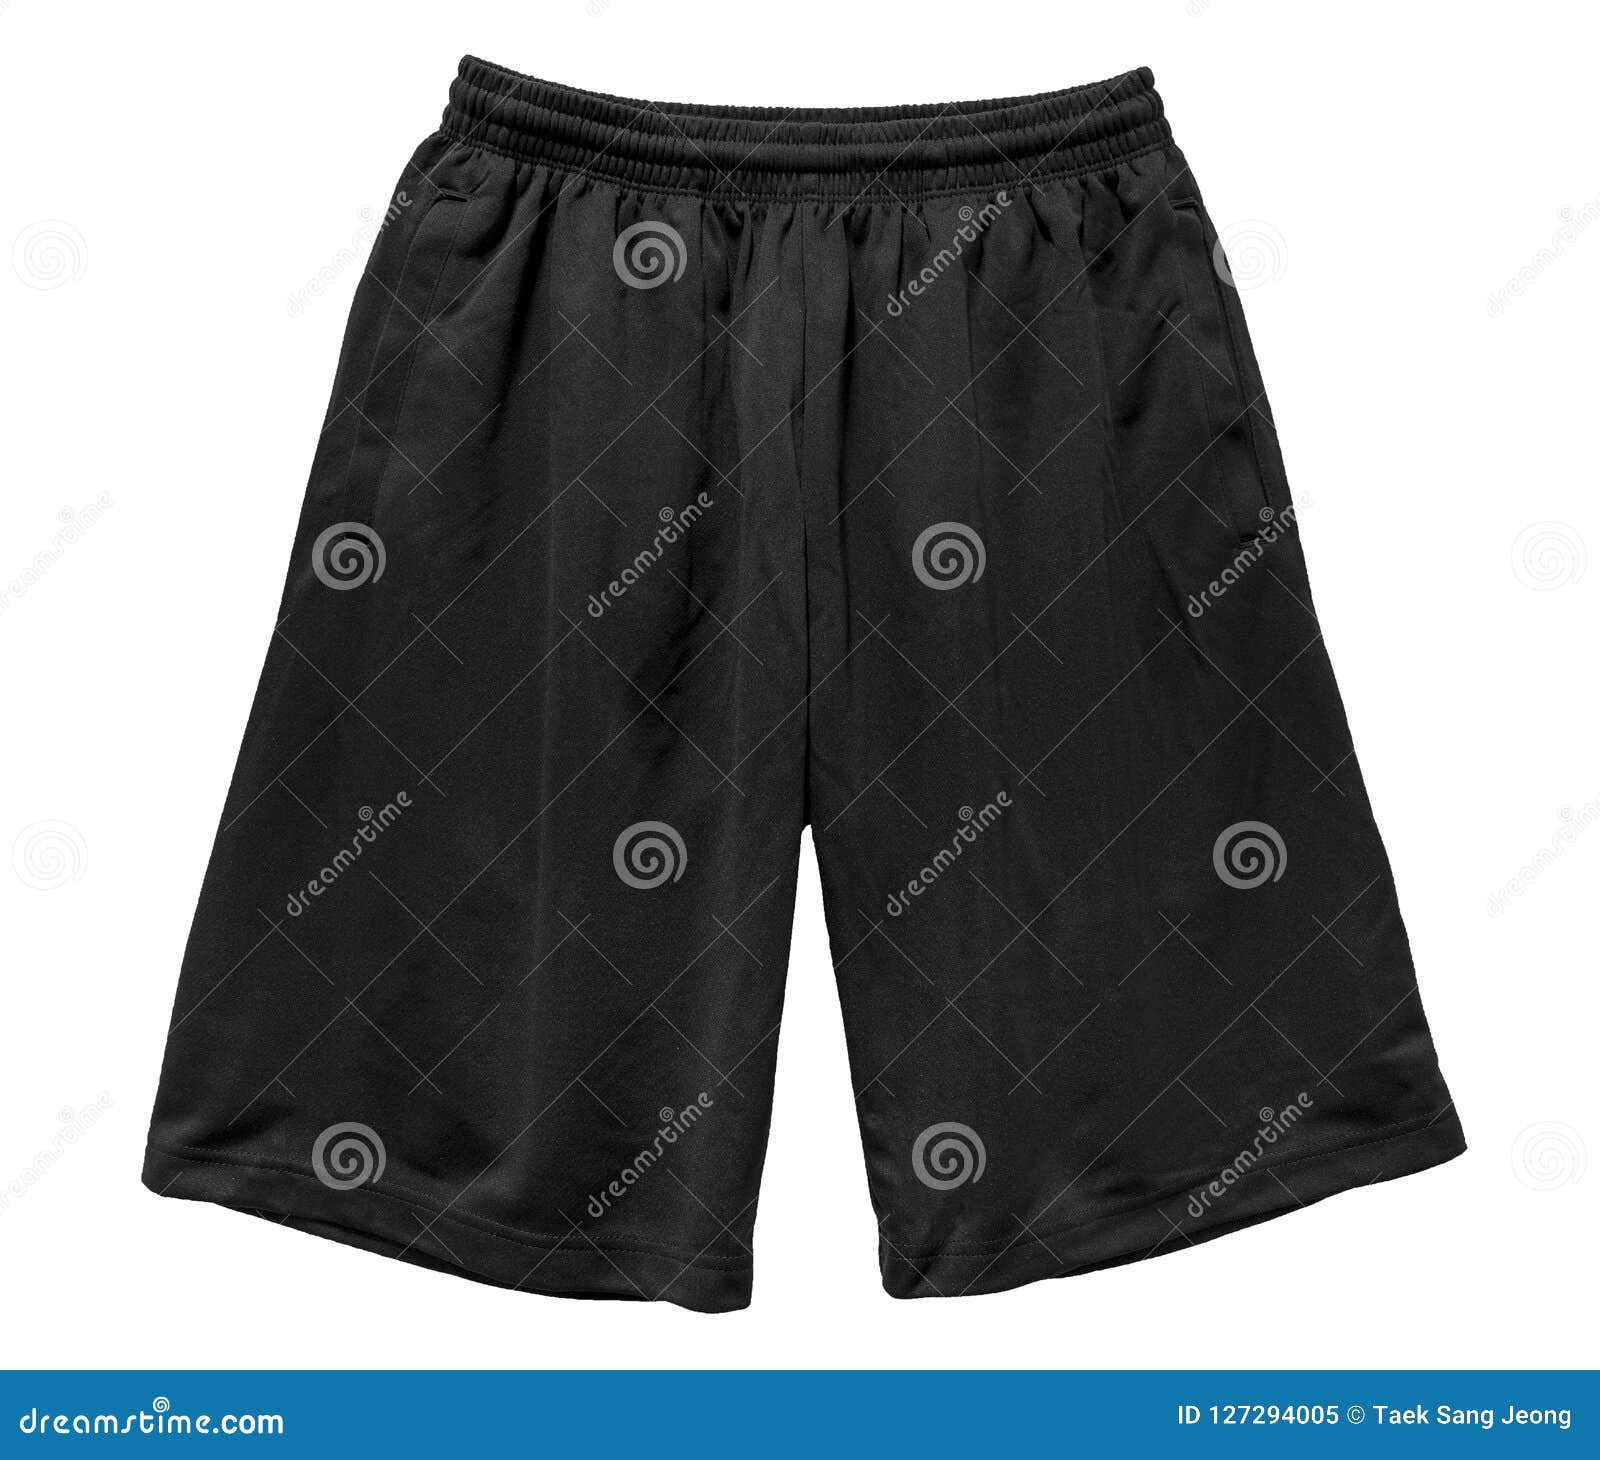 Blank Sports Short Pants Color Black Front View Stock Image - Image of ...